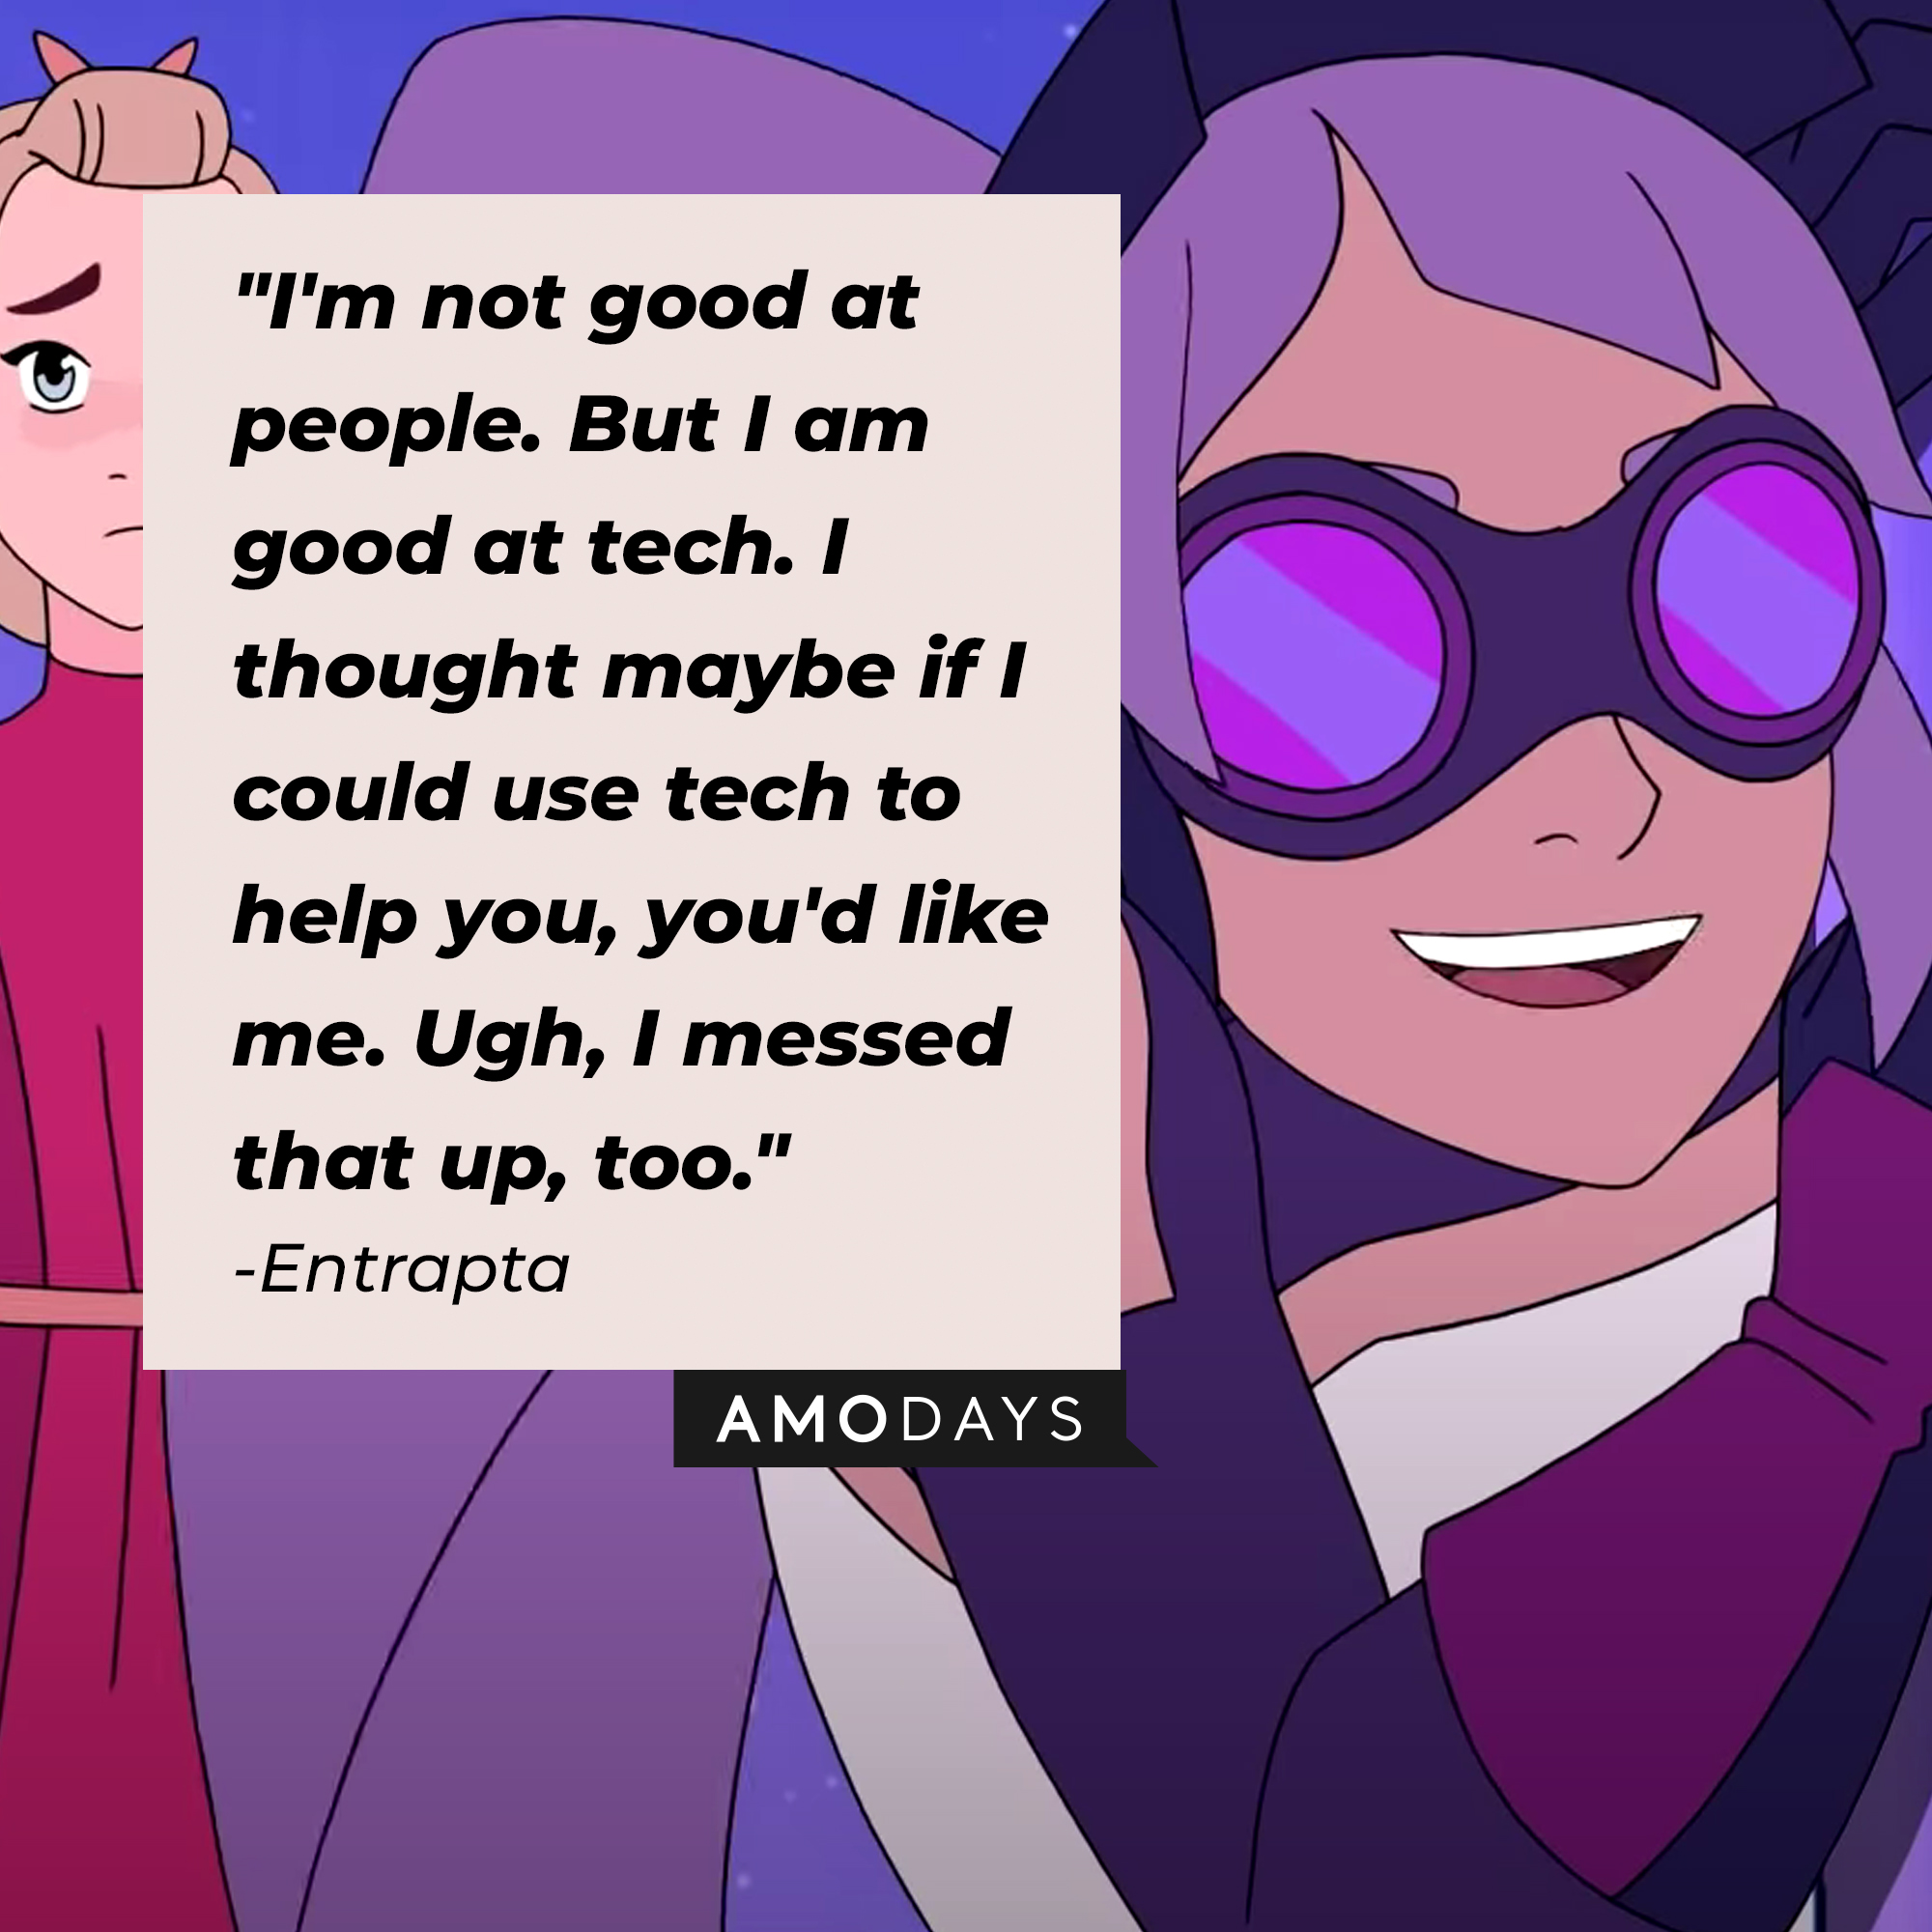 Entrapta's quote: "I'm not good at people. But I am good at tech. I thought maybe if I could use tech to help you, you'd like me. Ugh, I messed that up, too." | Source: youtube.com/netflixafterschool